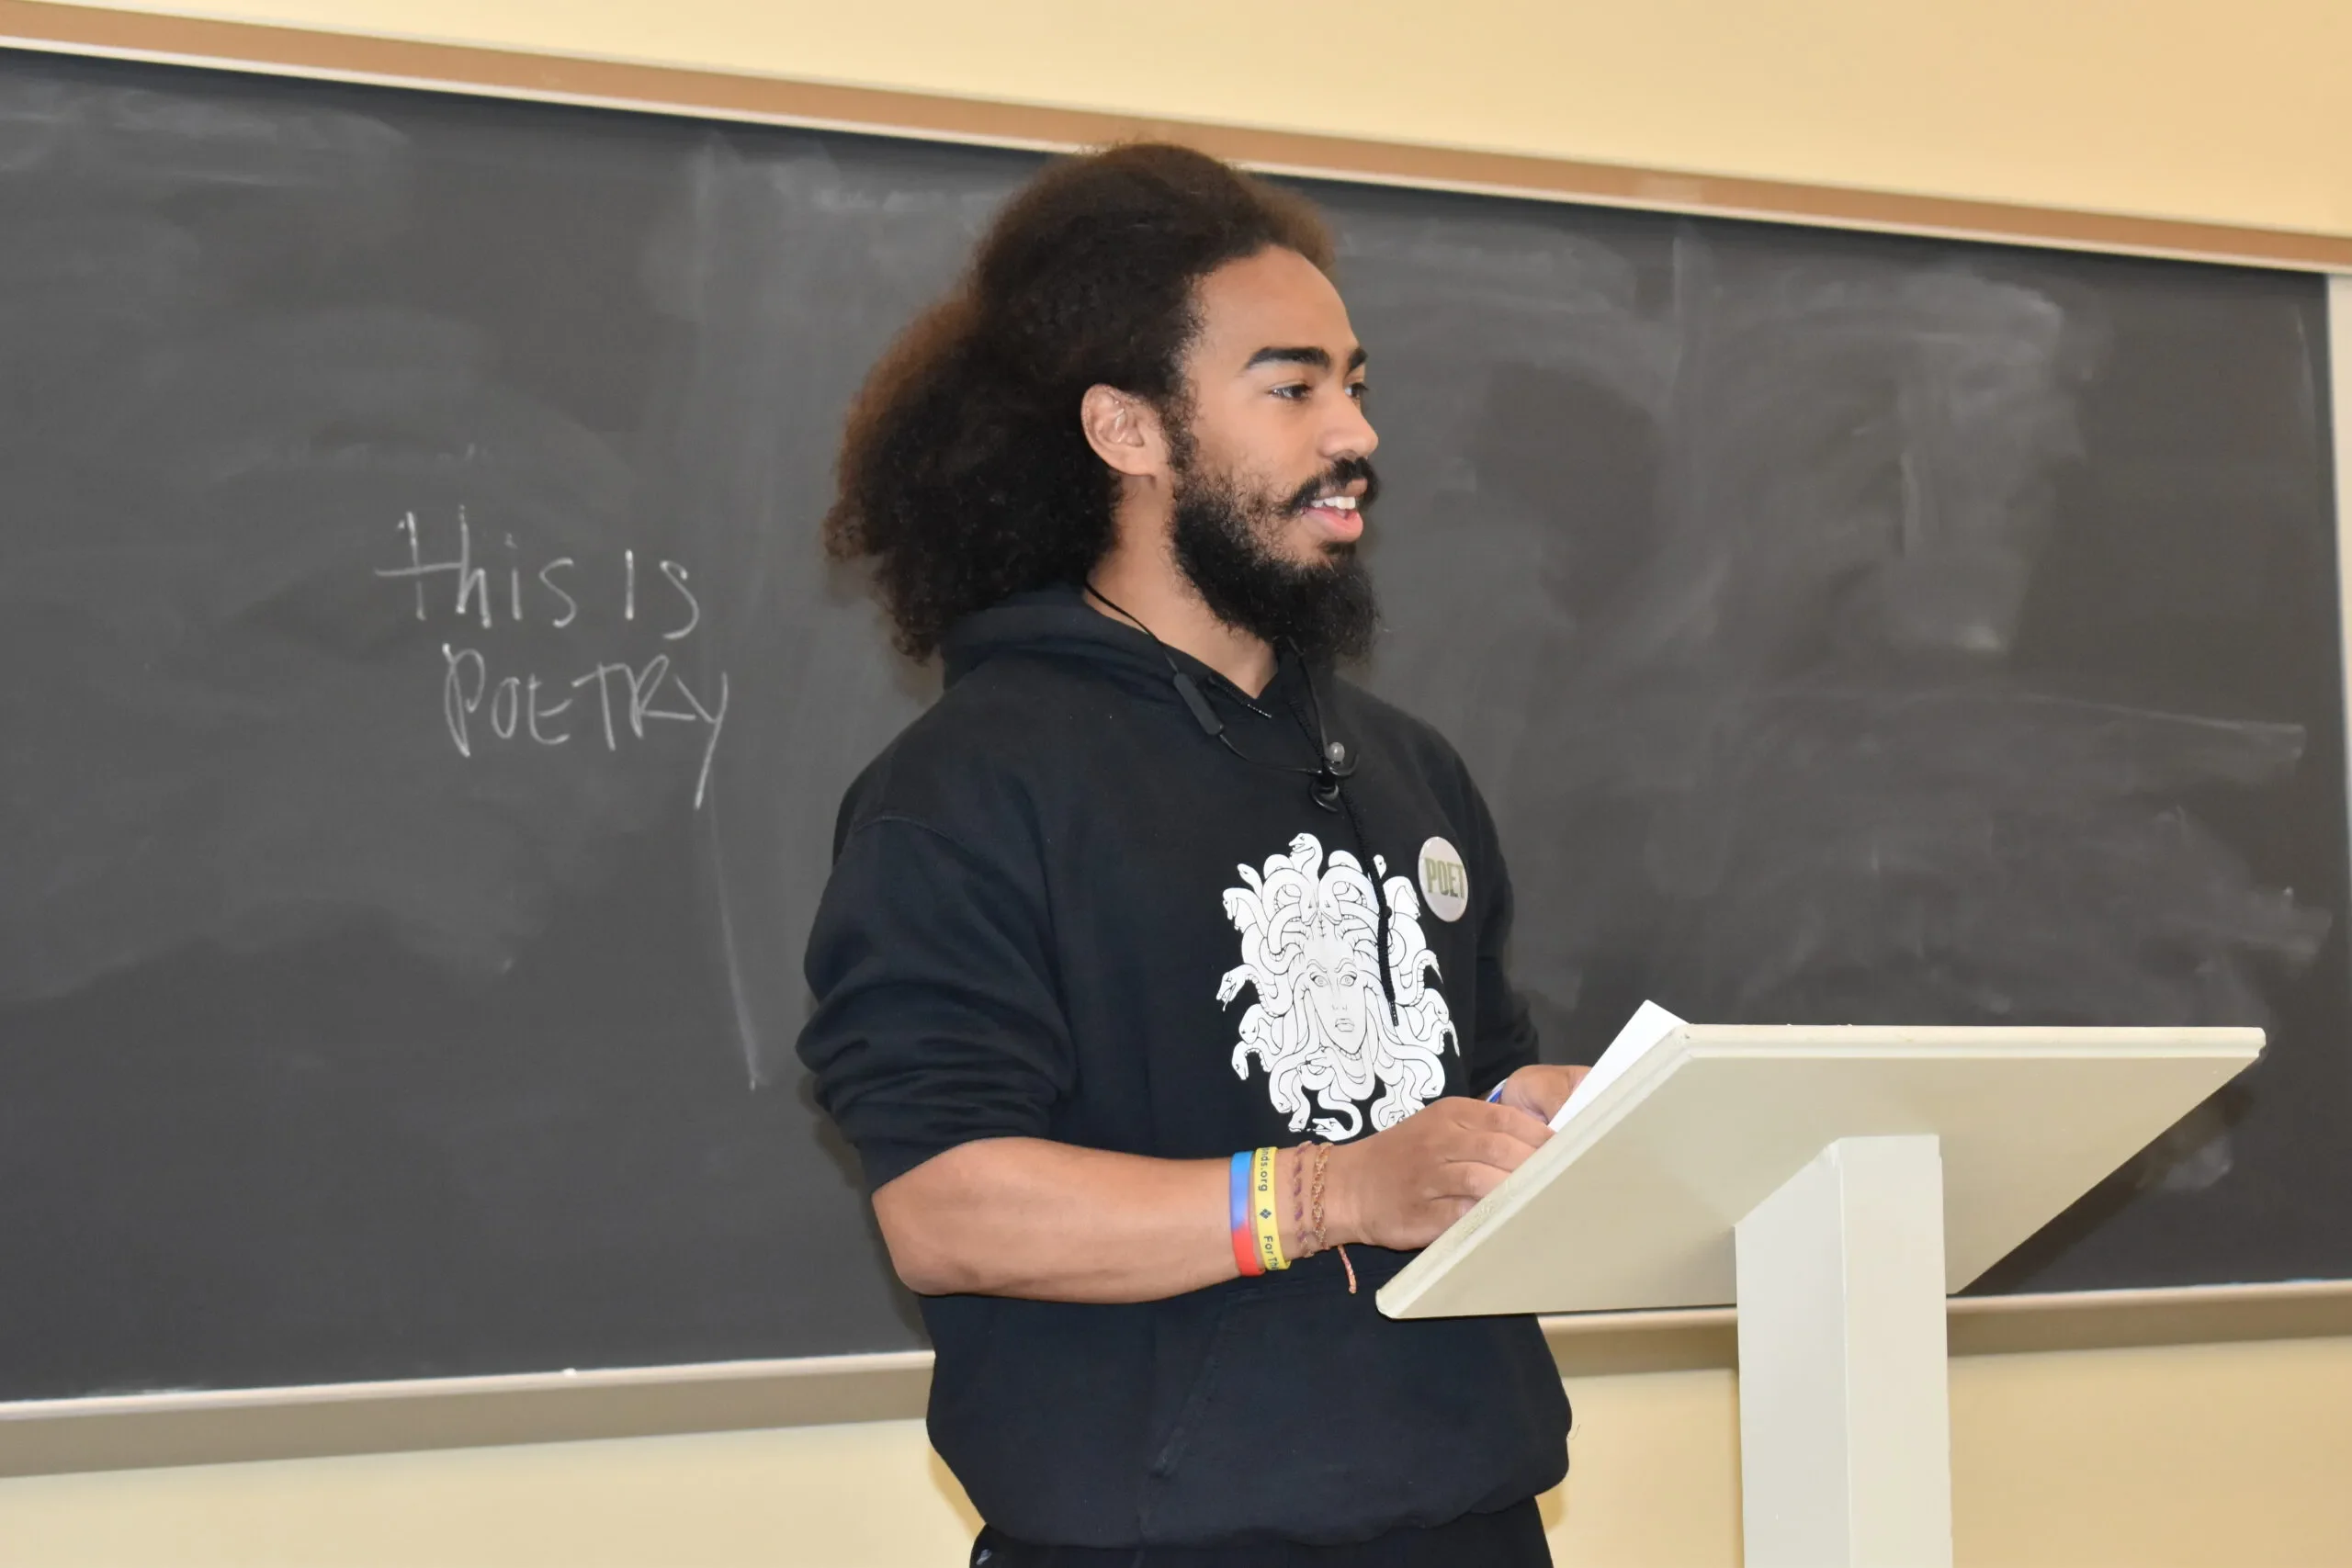 LVC English student Michai Figueroa stands at podium in front of chalkboard with the words, "This is poetry."